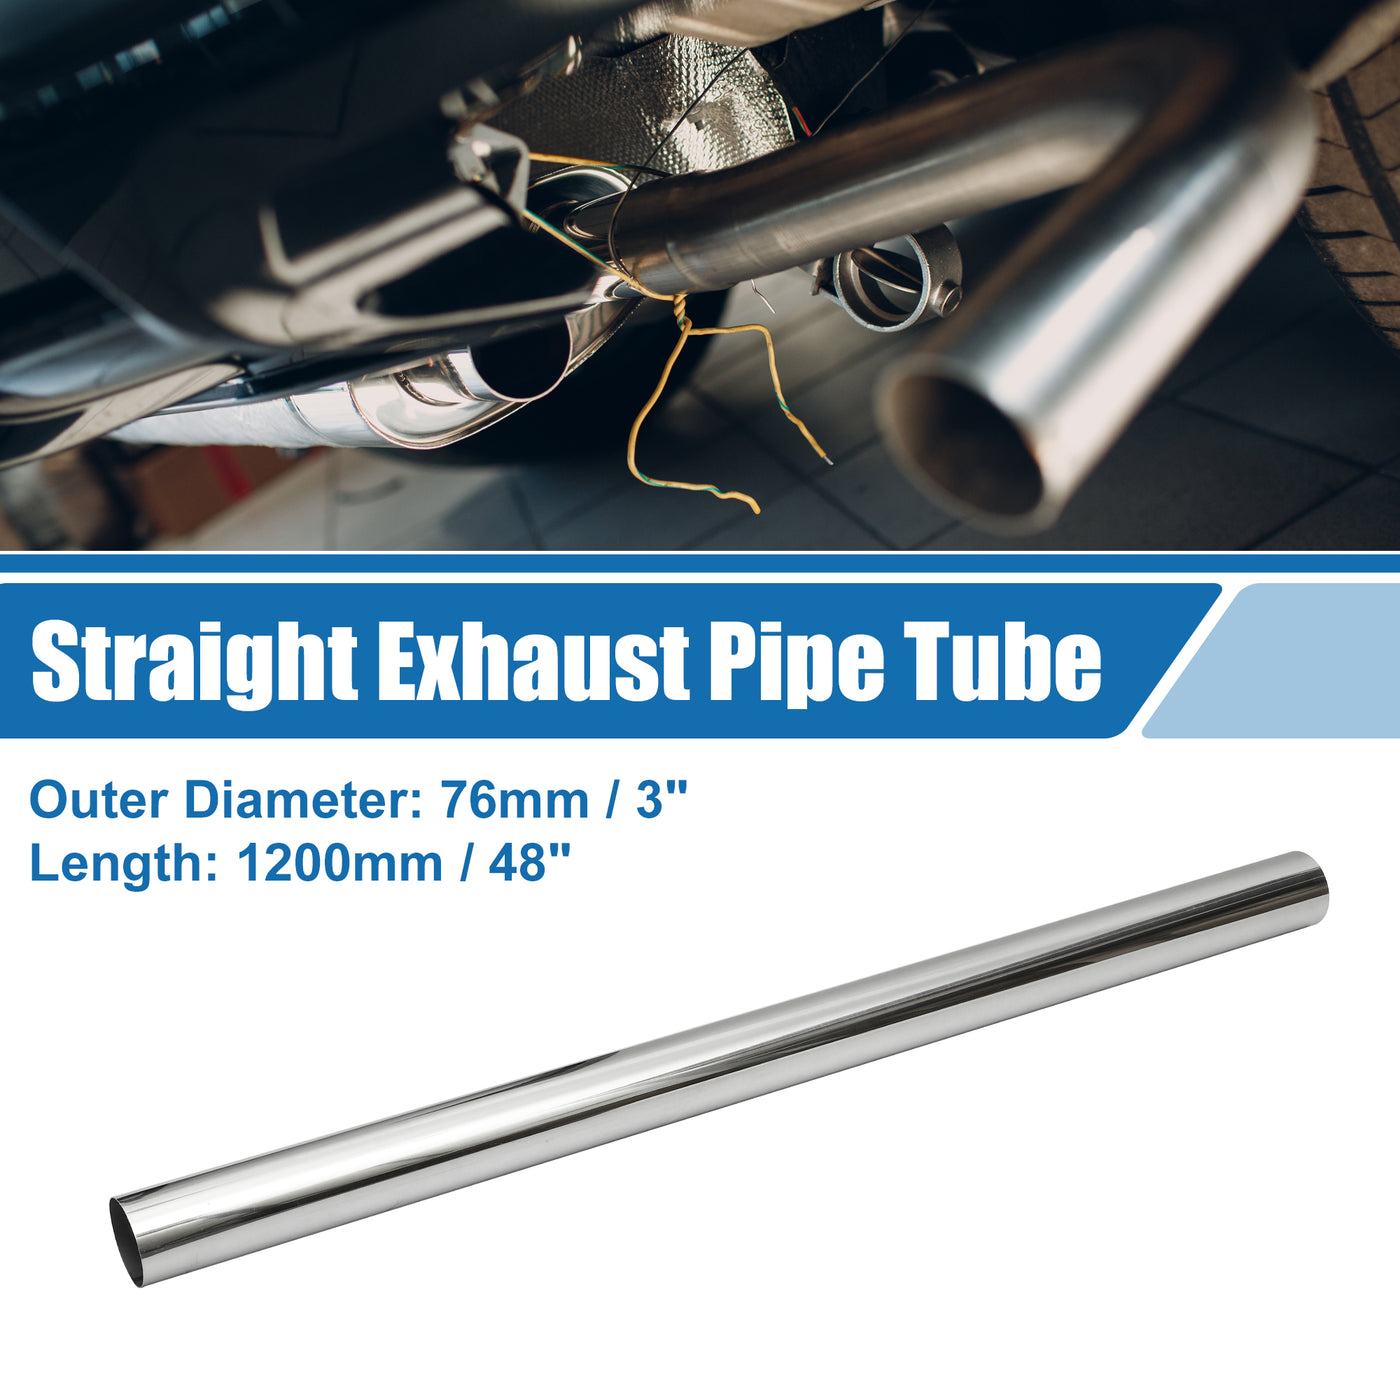 A ABSOPRO Car Mandrel Exhaust Pipe Tube Durable 48" Length 3'' OD Straight Exhaust Tube DIY Custom 0 Degree Modified Piping T304 Stainless Steel Silver Tone